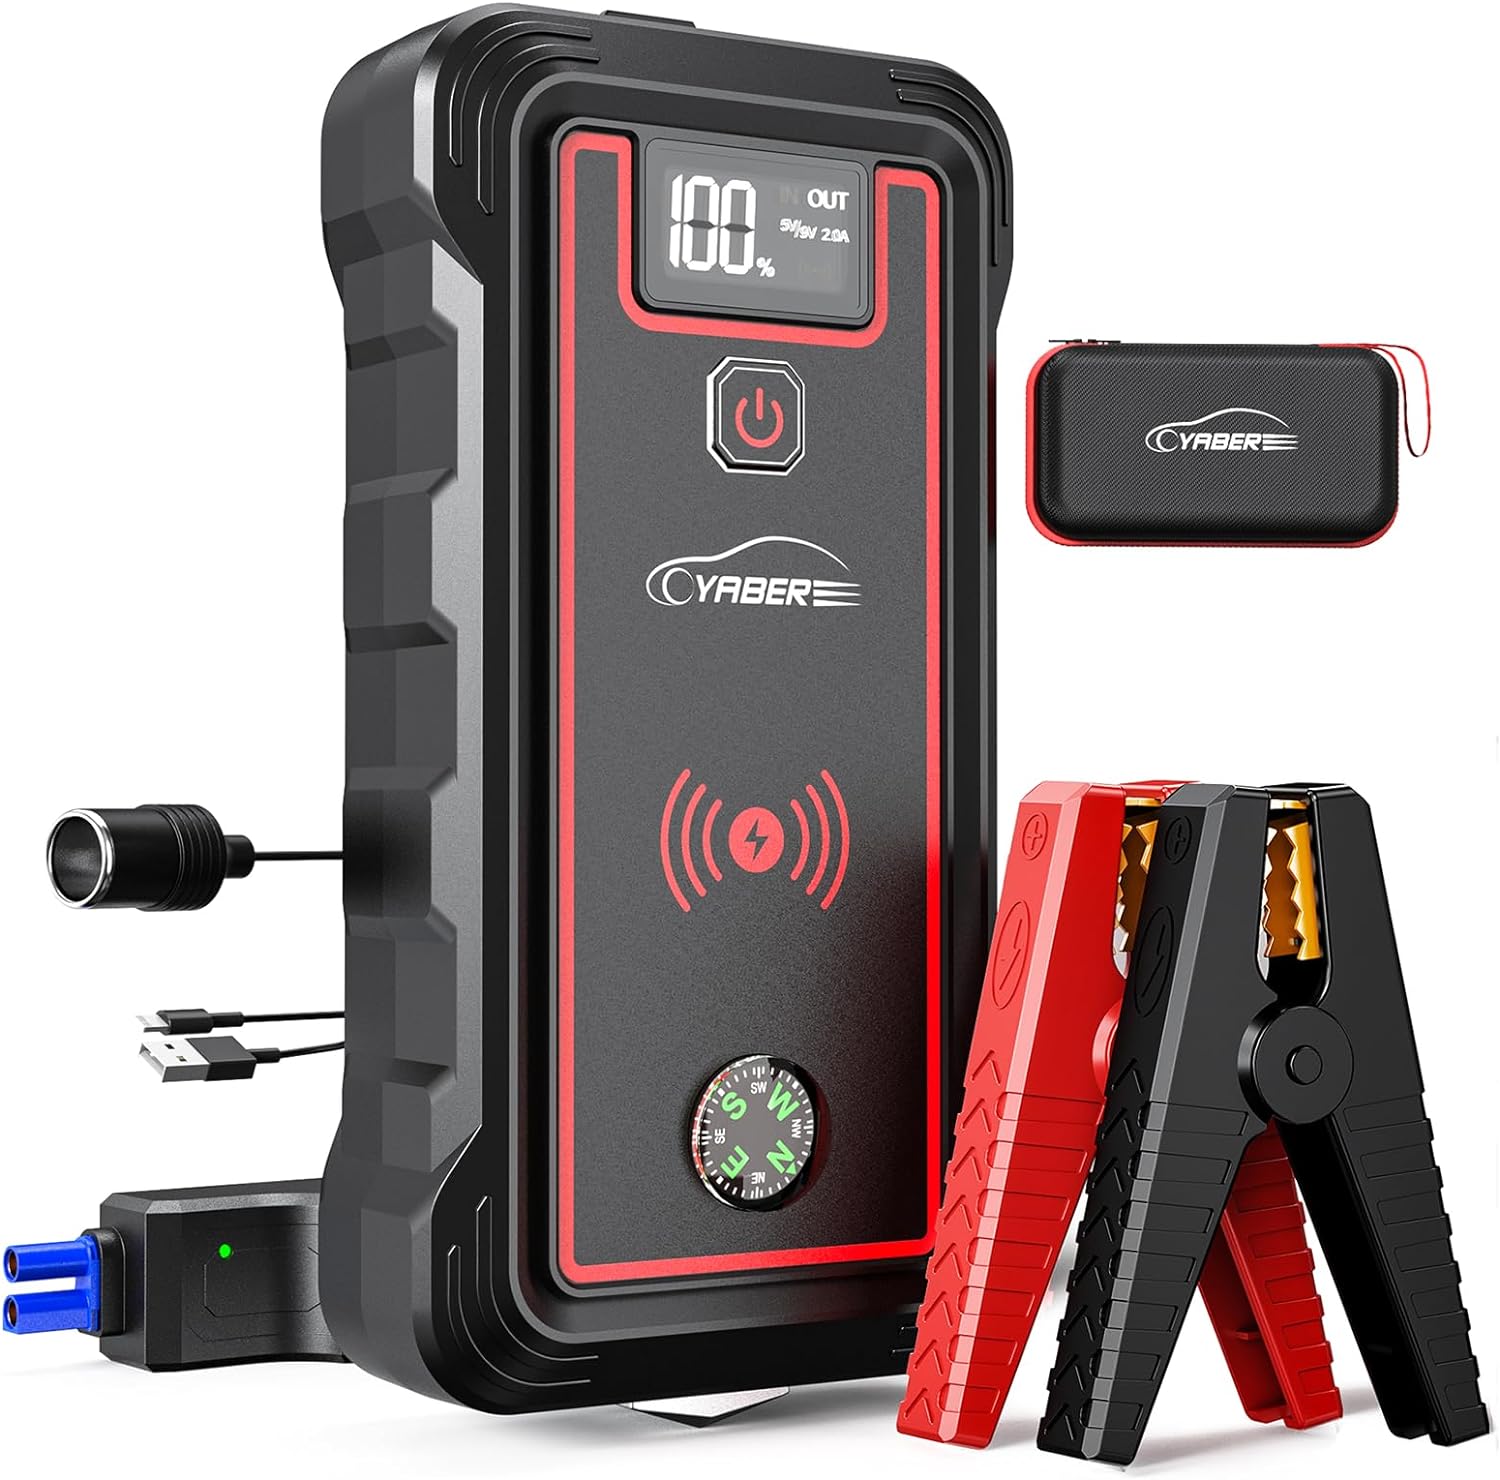 YABER Jump Starter Power Pack 5000A Peak Car Battery Booster Jump Starter for All Gas Petrol 8.0L Diesel Engines - Jump Starter with 10W Wireless Charger + LED Flashlight + USB-C Port + Digital LCD Screen + Compass + Safety Hammer